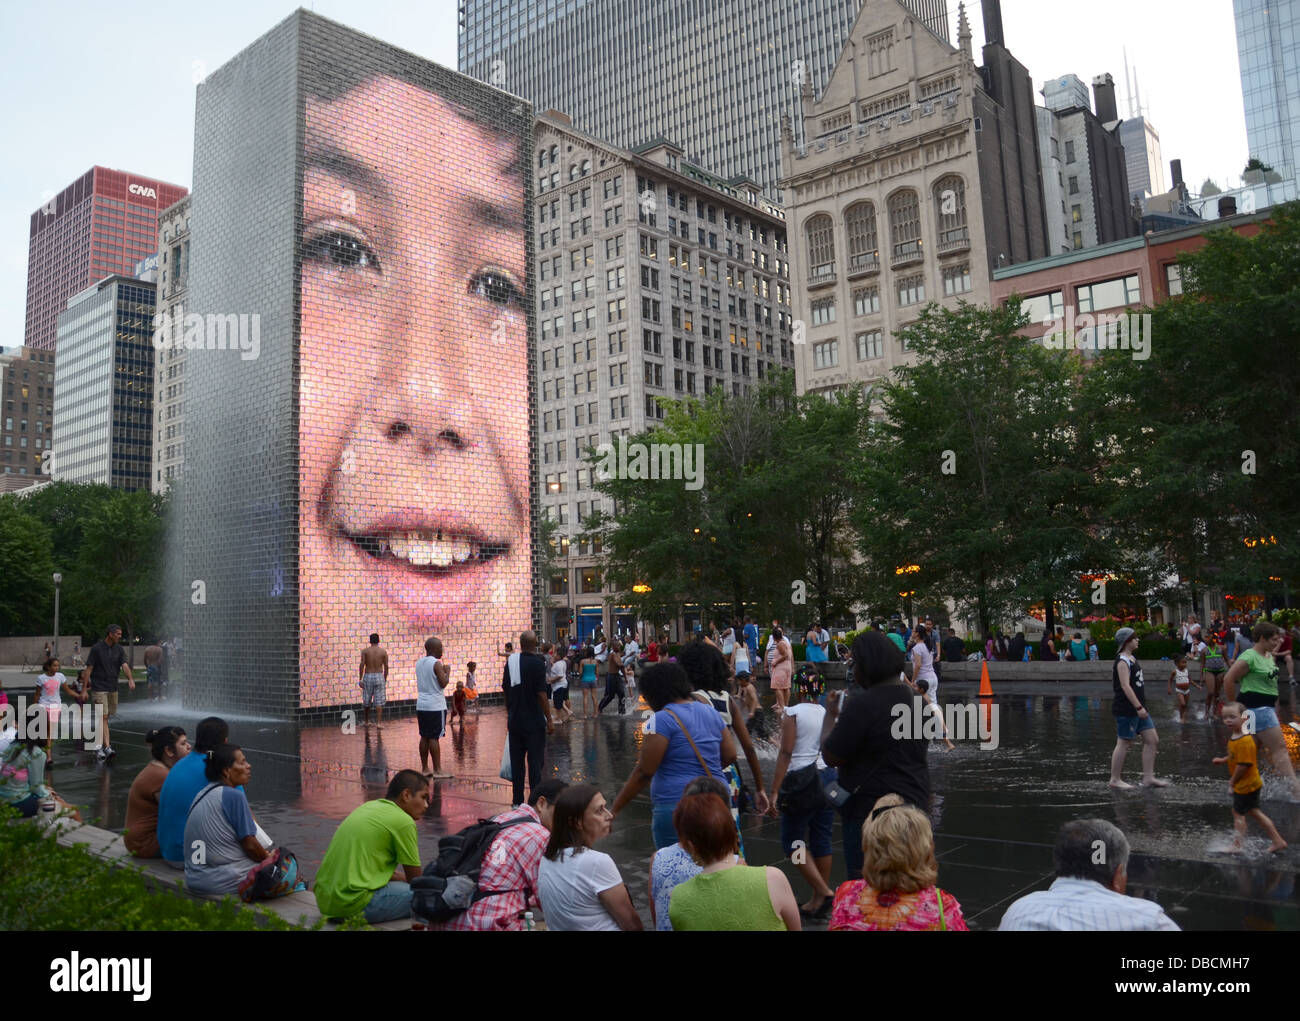 CHICAGO - JULY 18: People seek relief from the heat at Crown Fountain in downtown Chicago on July 18, 2013. Stock Photo